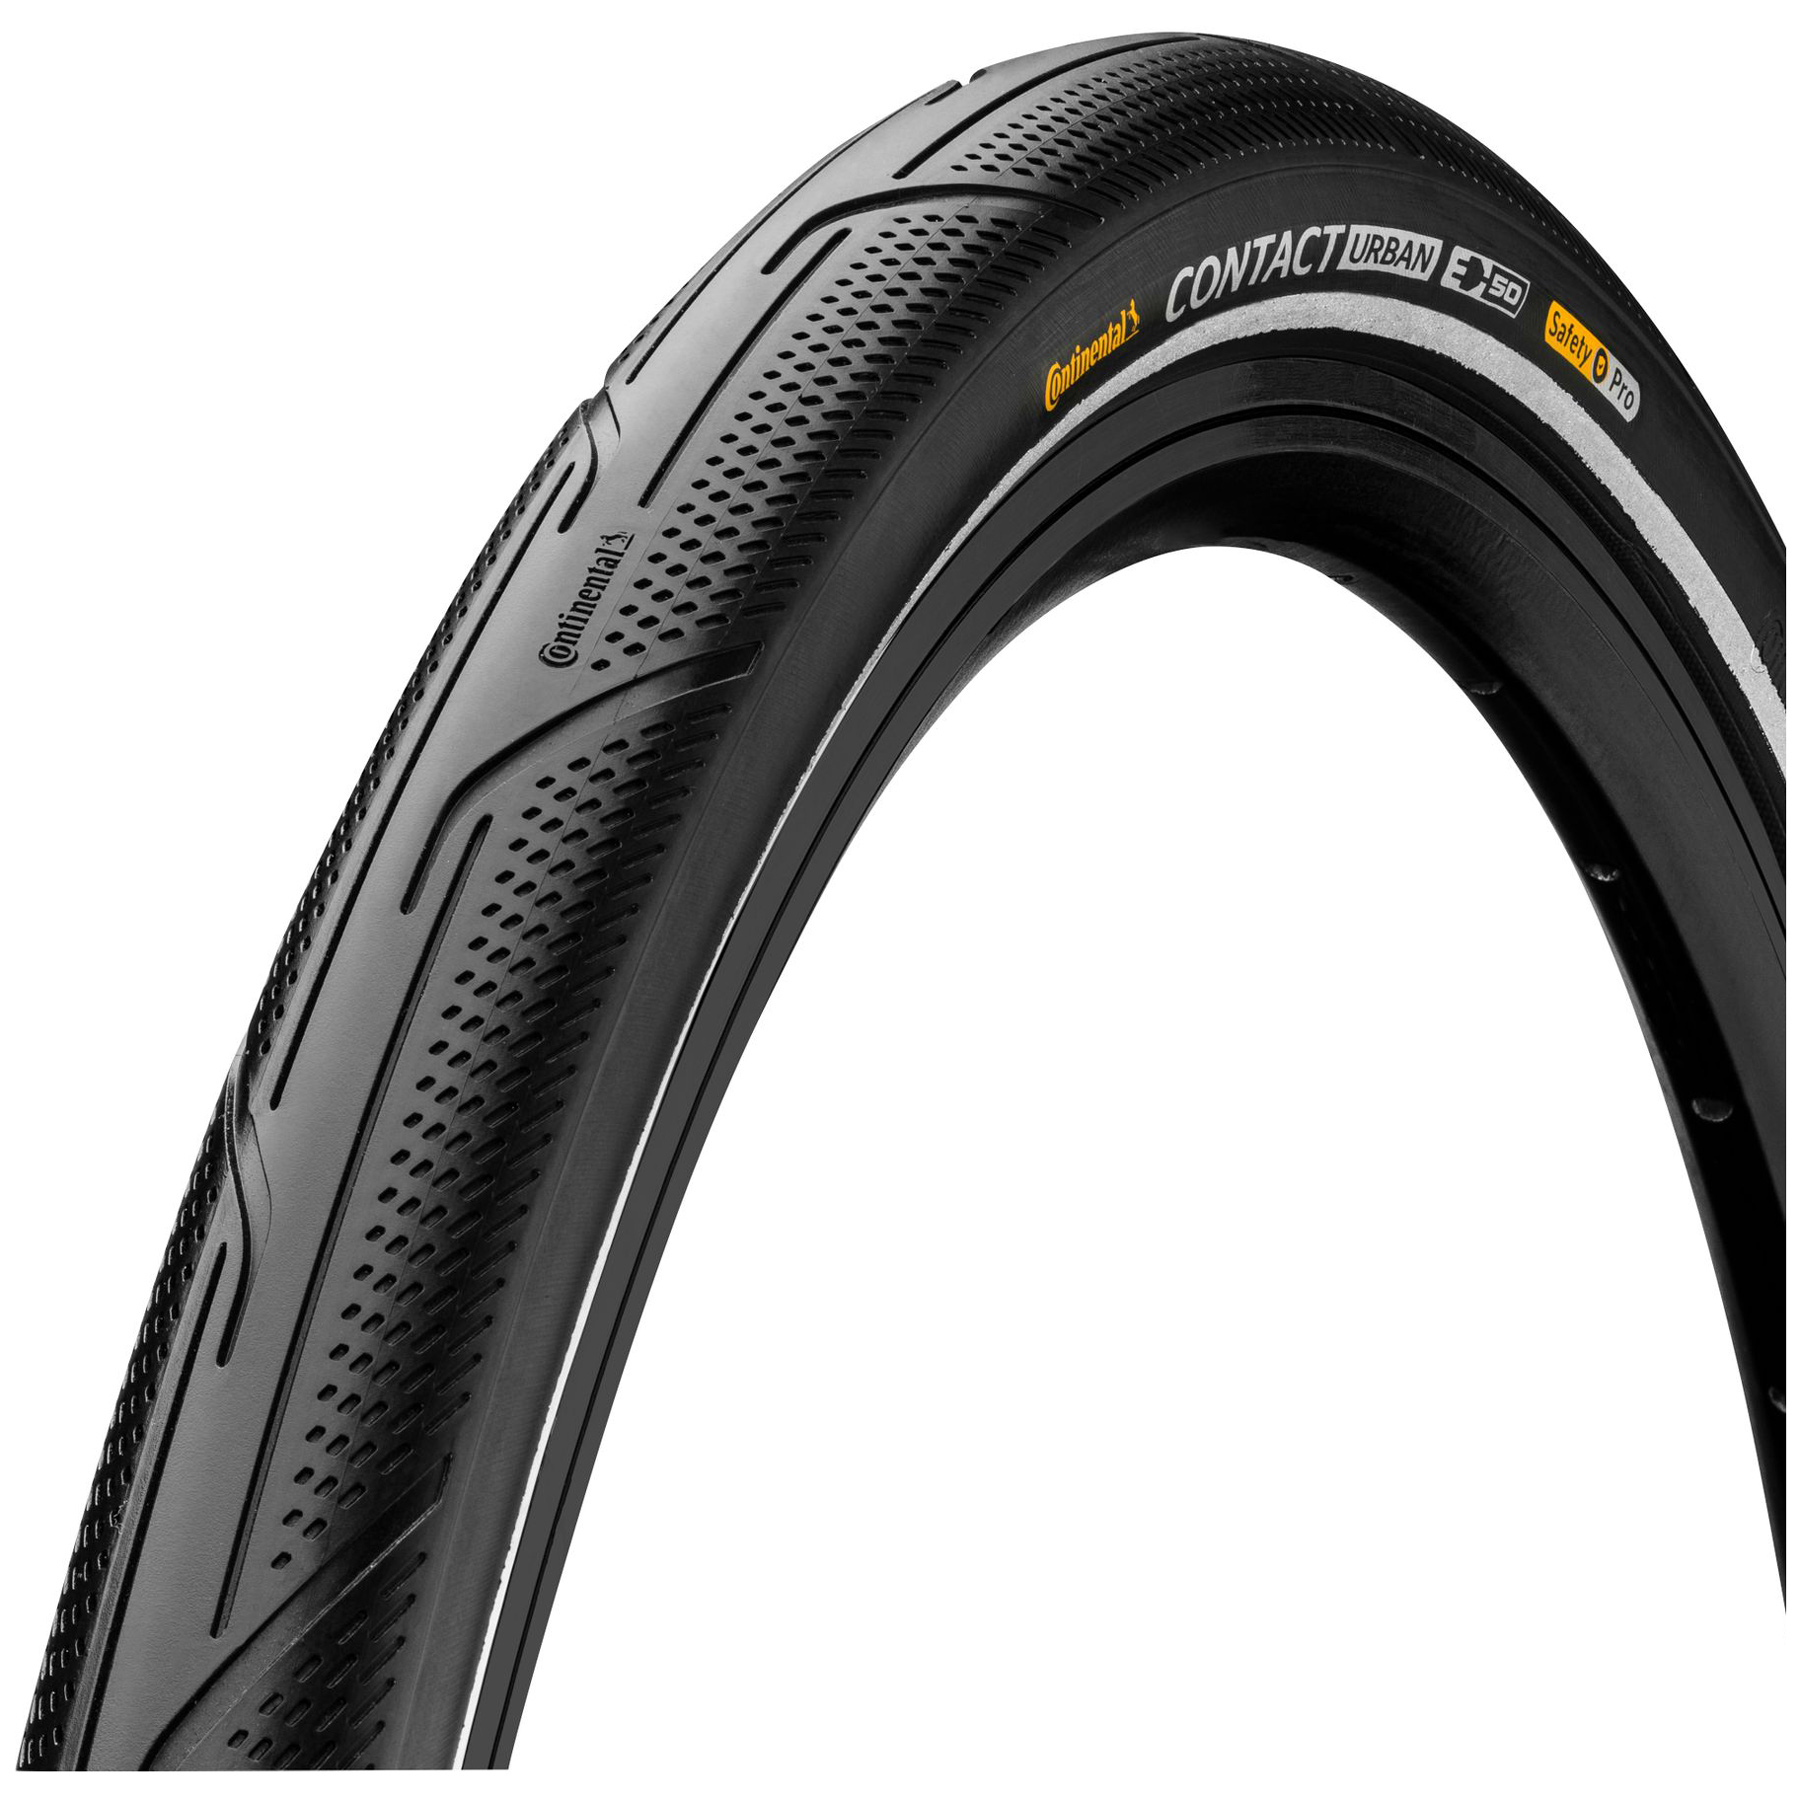 Image of Continental Contact Urban Wire Bead Tire - PureGrip | black reflective - ECE-R75 - 42-622